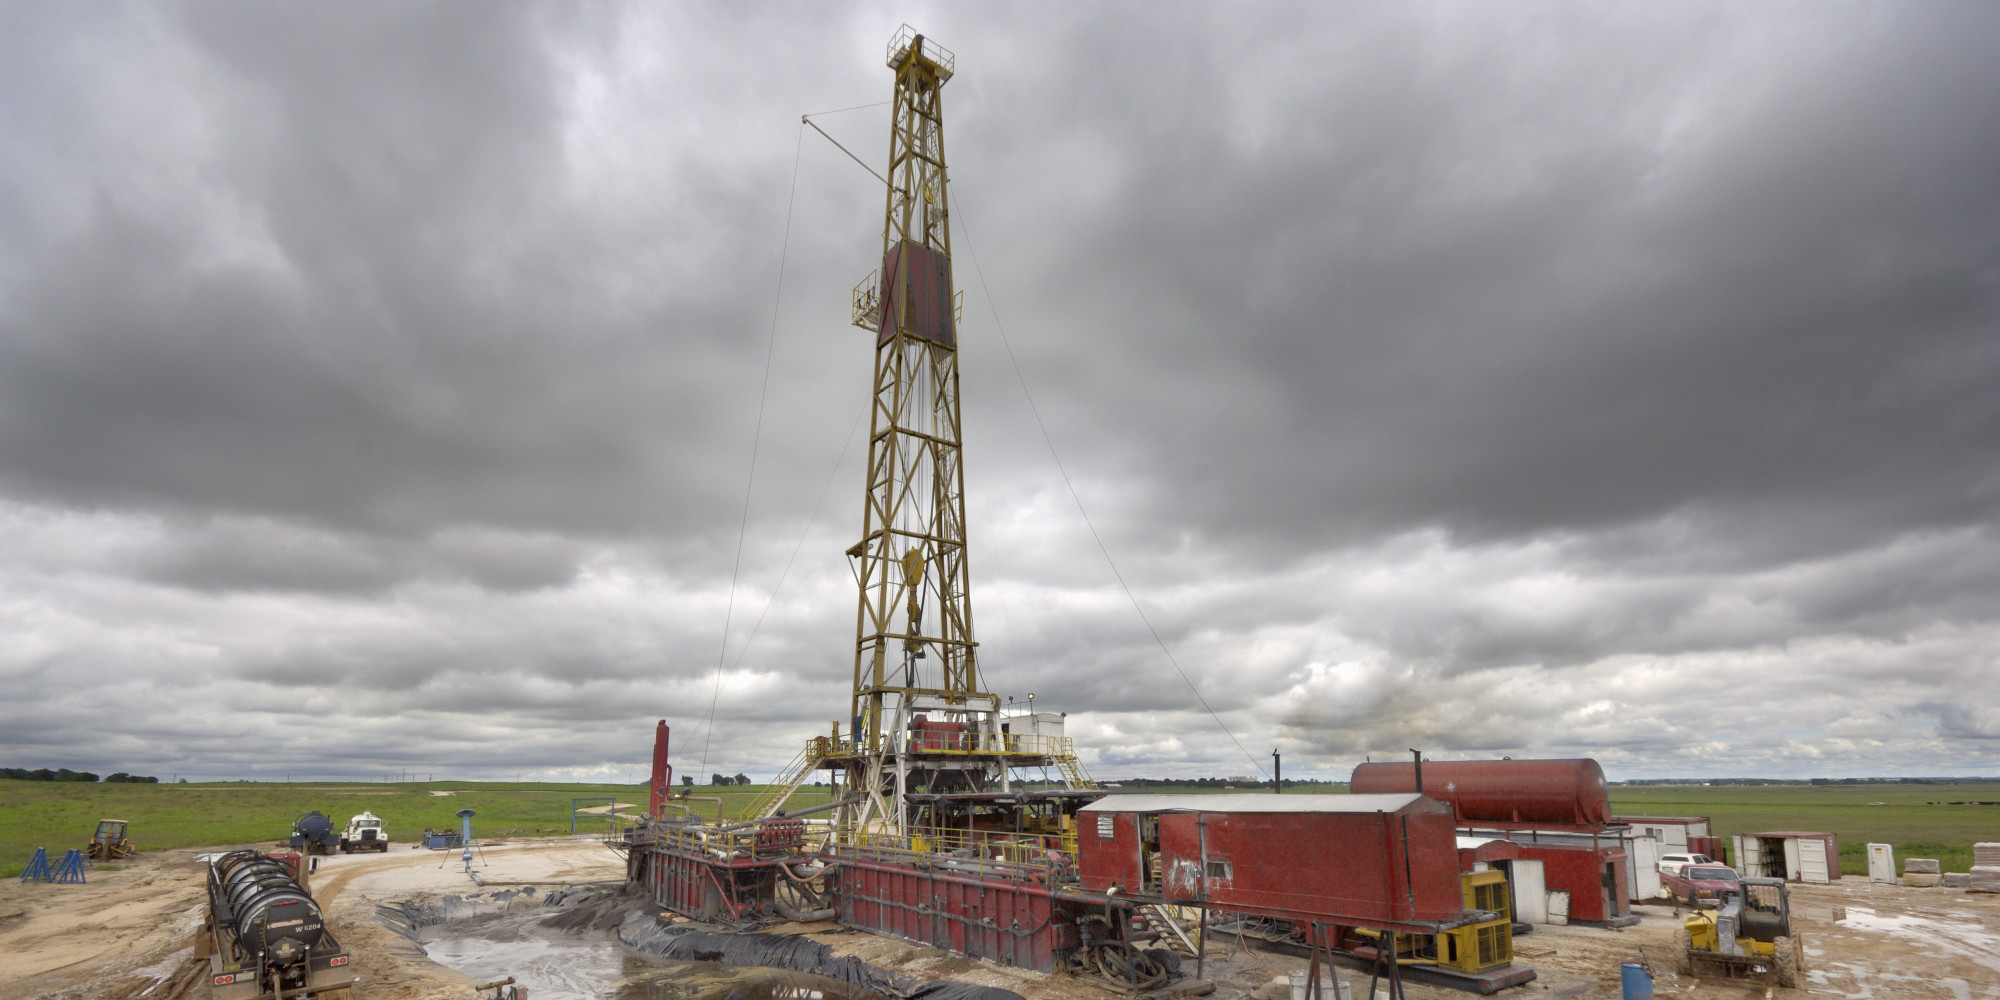 Oklahoma 'Earthquake Swarm' May Be Linked Wastewater Disposal From Fracking | HuffPost